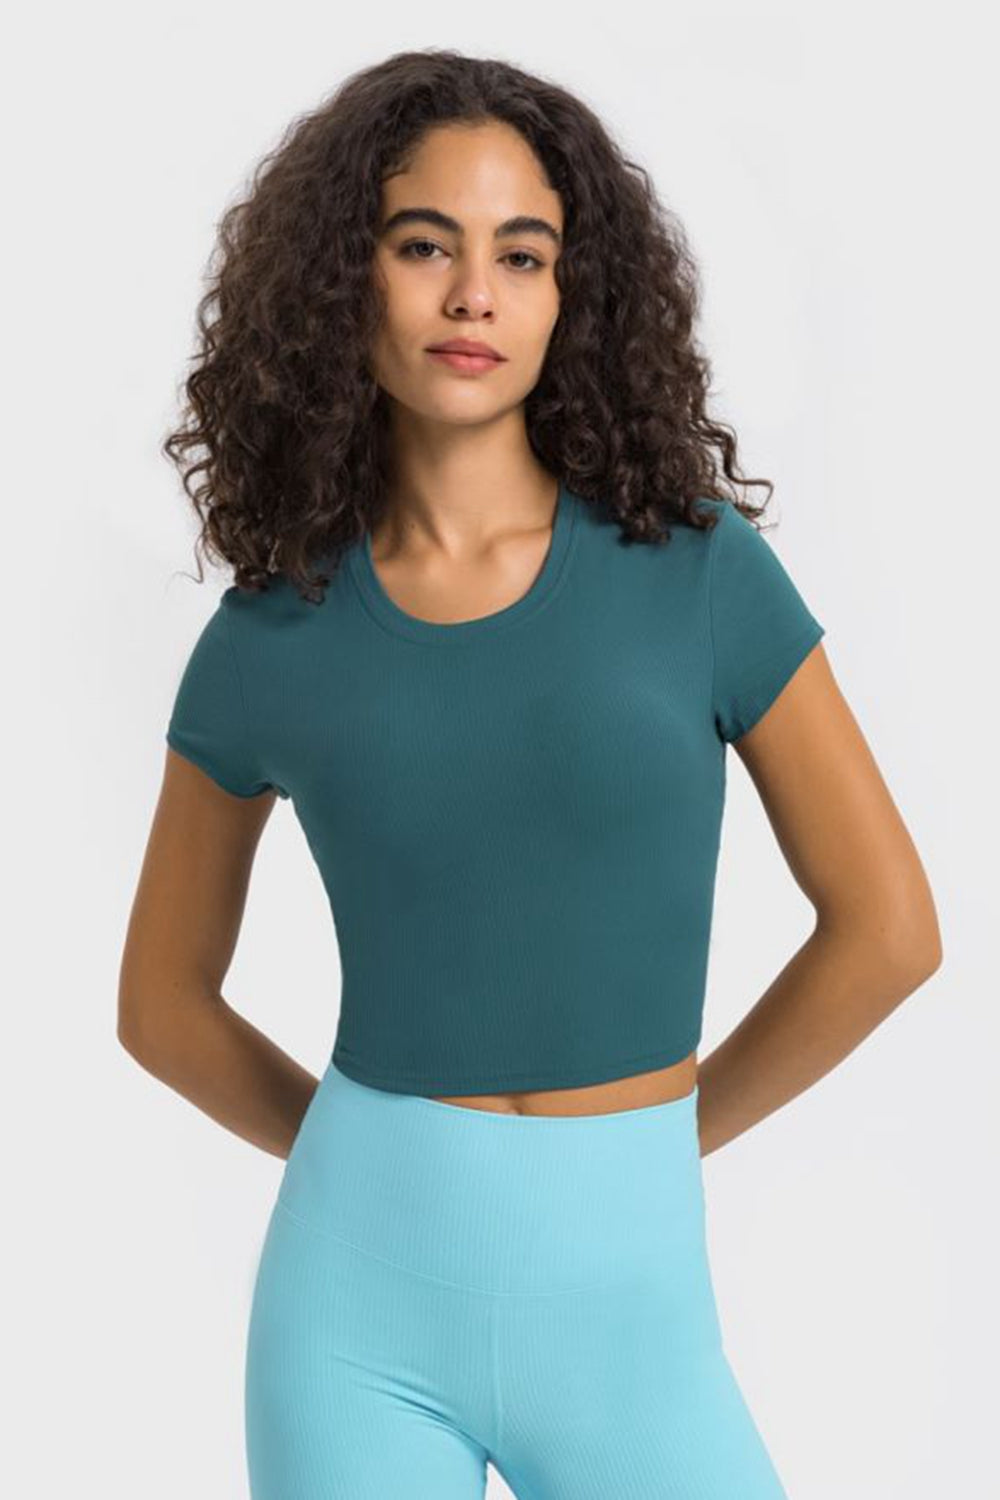 Short Sleeve Cropped Activewear Top